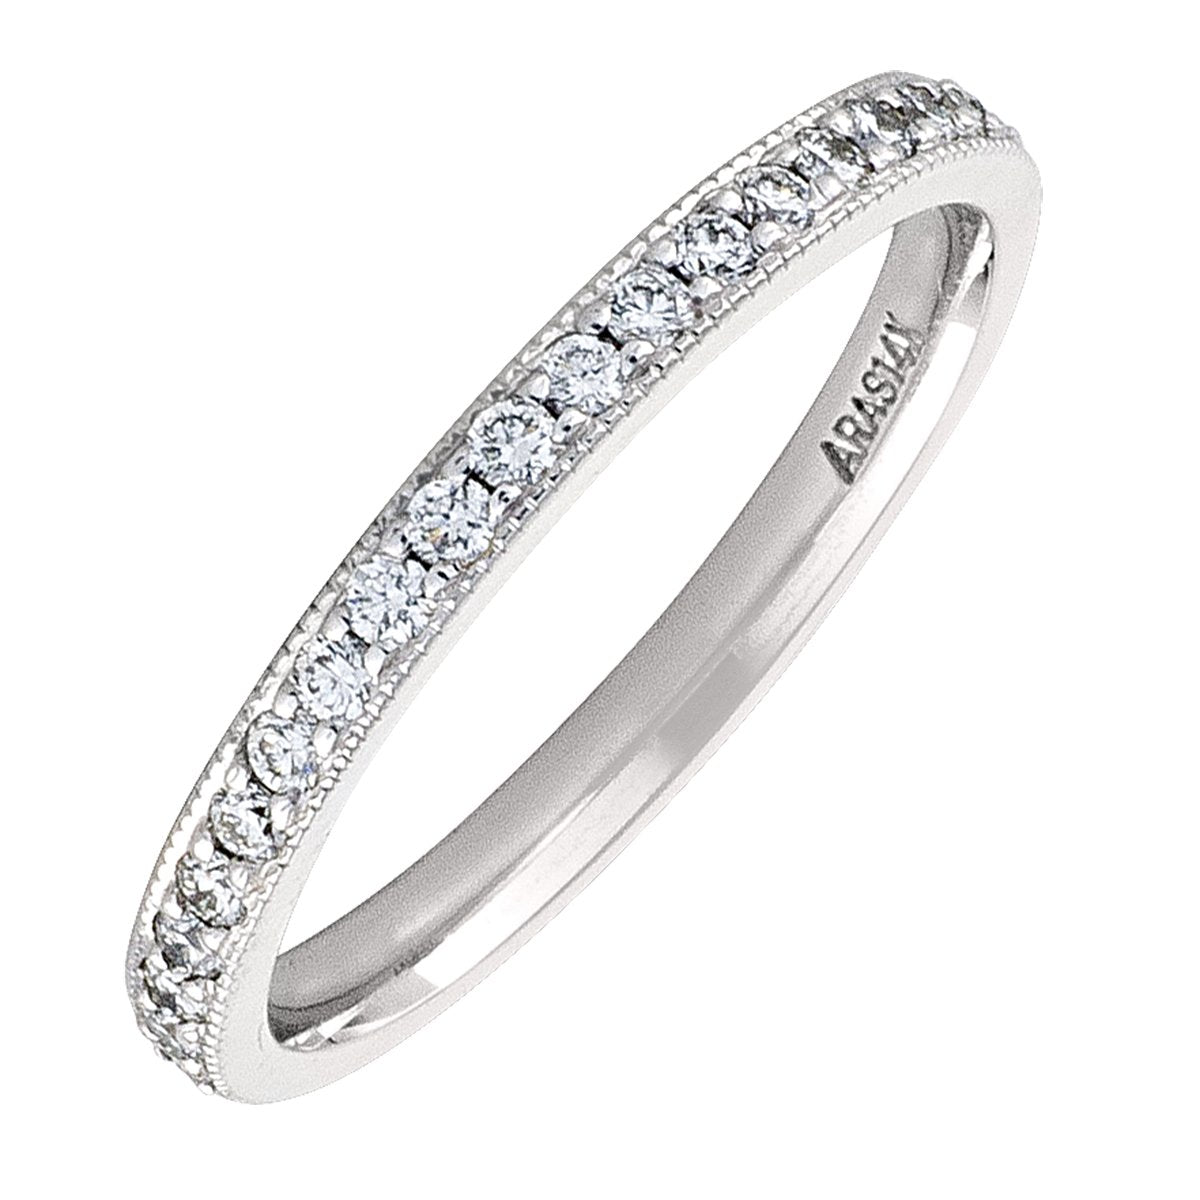 WHITE GOLD DIAMOND PAVE FULL ETERNITY BAND  (AVAILABE IN VARIOUS STONE AND RING SIZE).